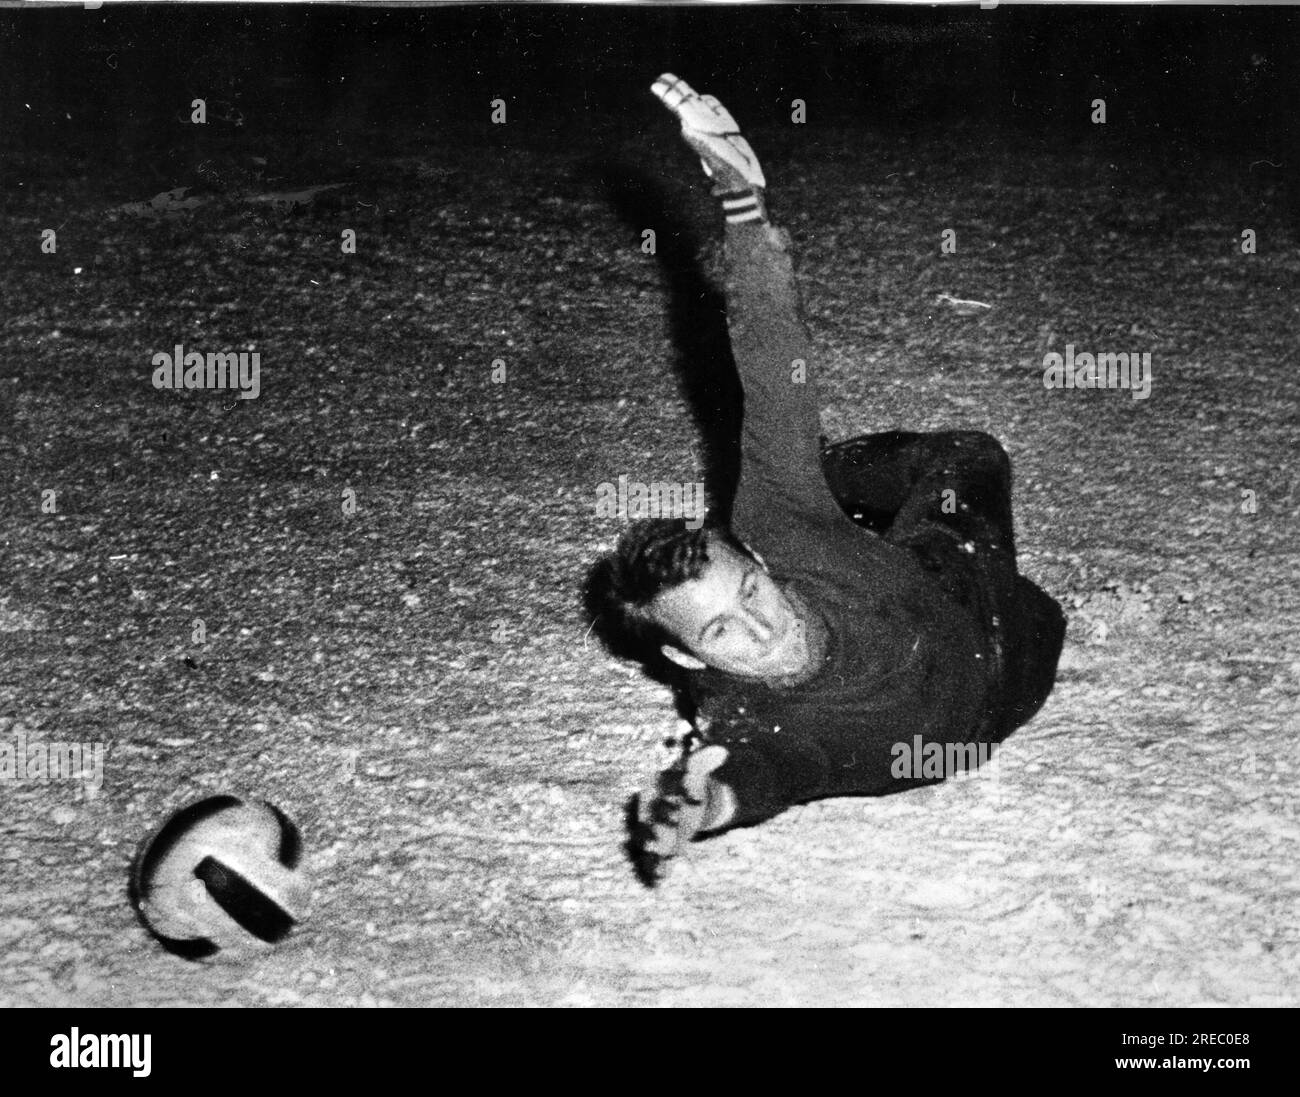 Weigang, Horst, * 30.9.1940, German athlete (footballer), ADDITIONAL-RIGHTS-CLEARANCE-INFO-NOT-AVAILABLE Stock Photo